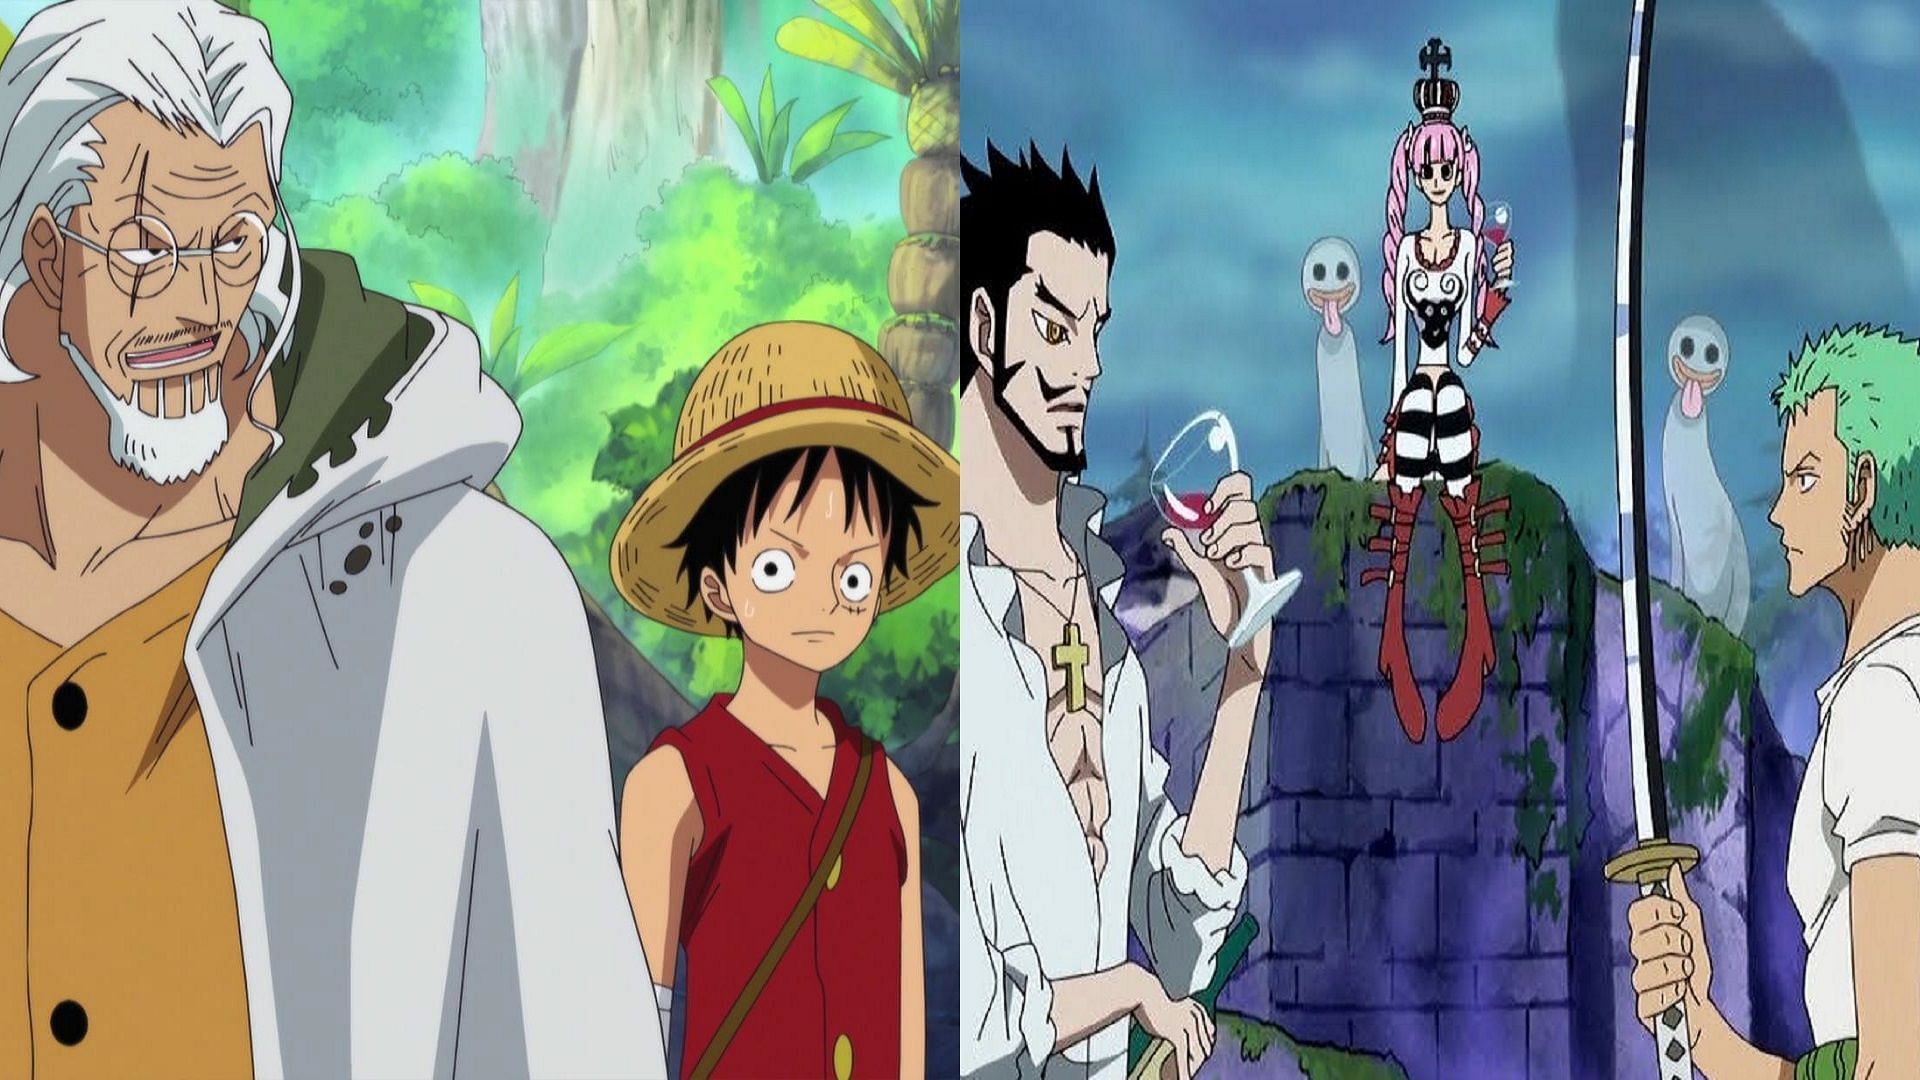 Luffy was trained by Silvers Rayleigh, while Zoro received teachings from Dracule Mihawk (Image via Toei Animation, One Piece)